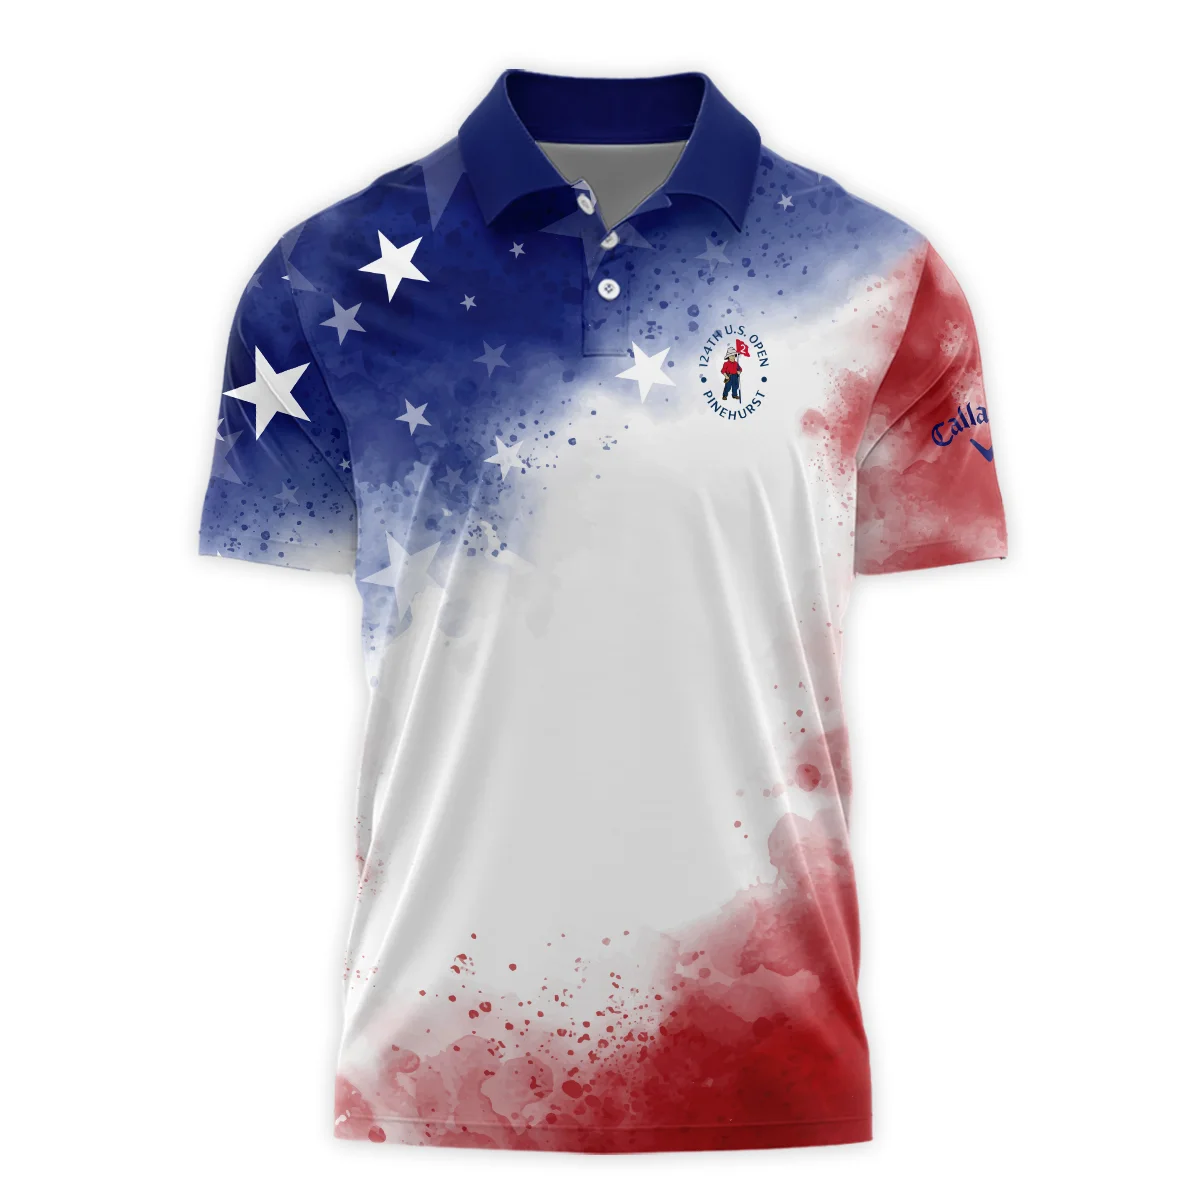 124th U.S. Open Pinehurst Callaway Blue Red Watercolor Star White Backgound Polo Shirt Style Classic Polo Shirt For Men